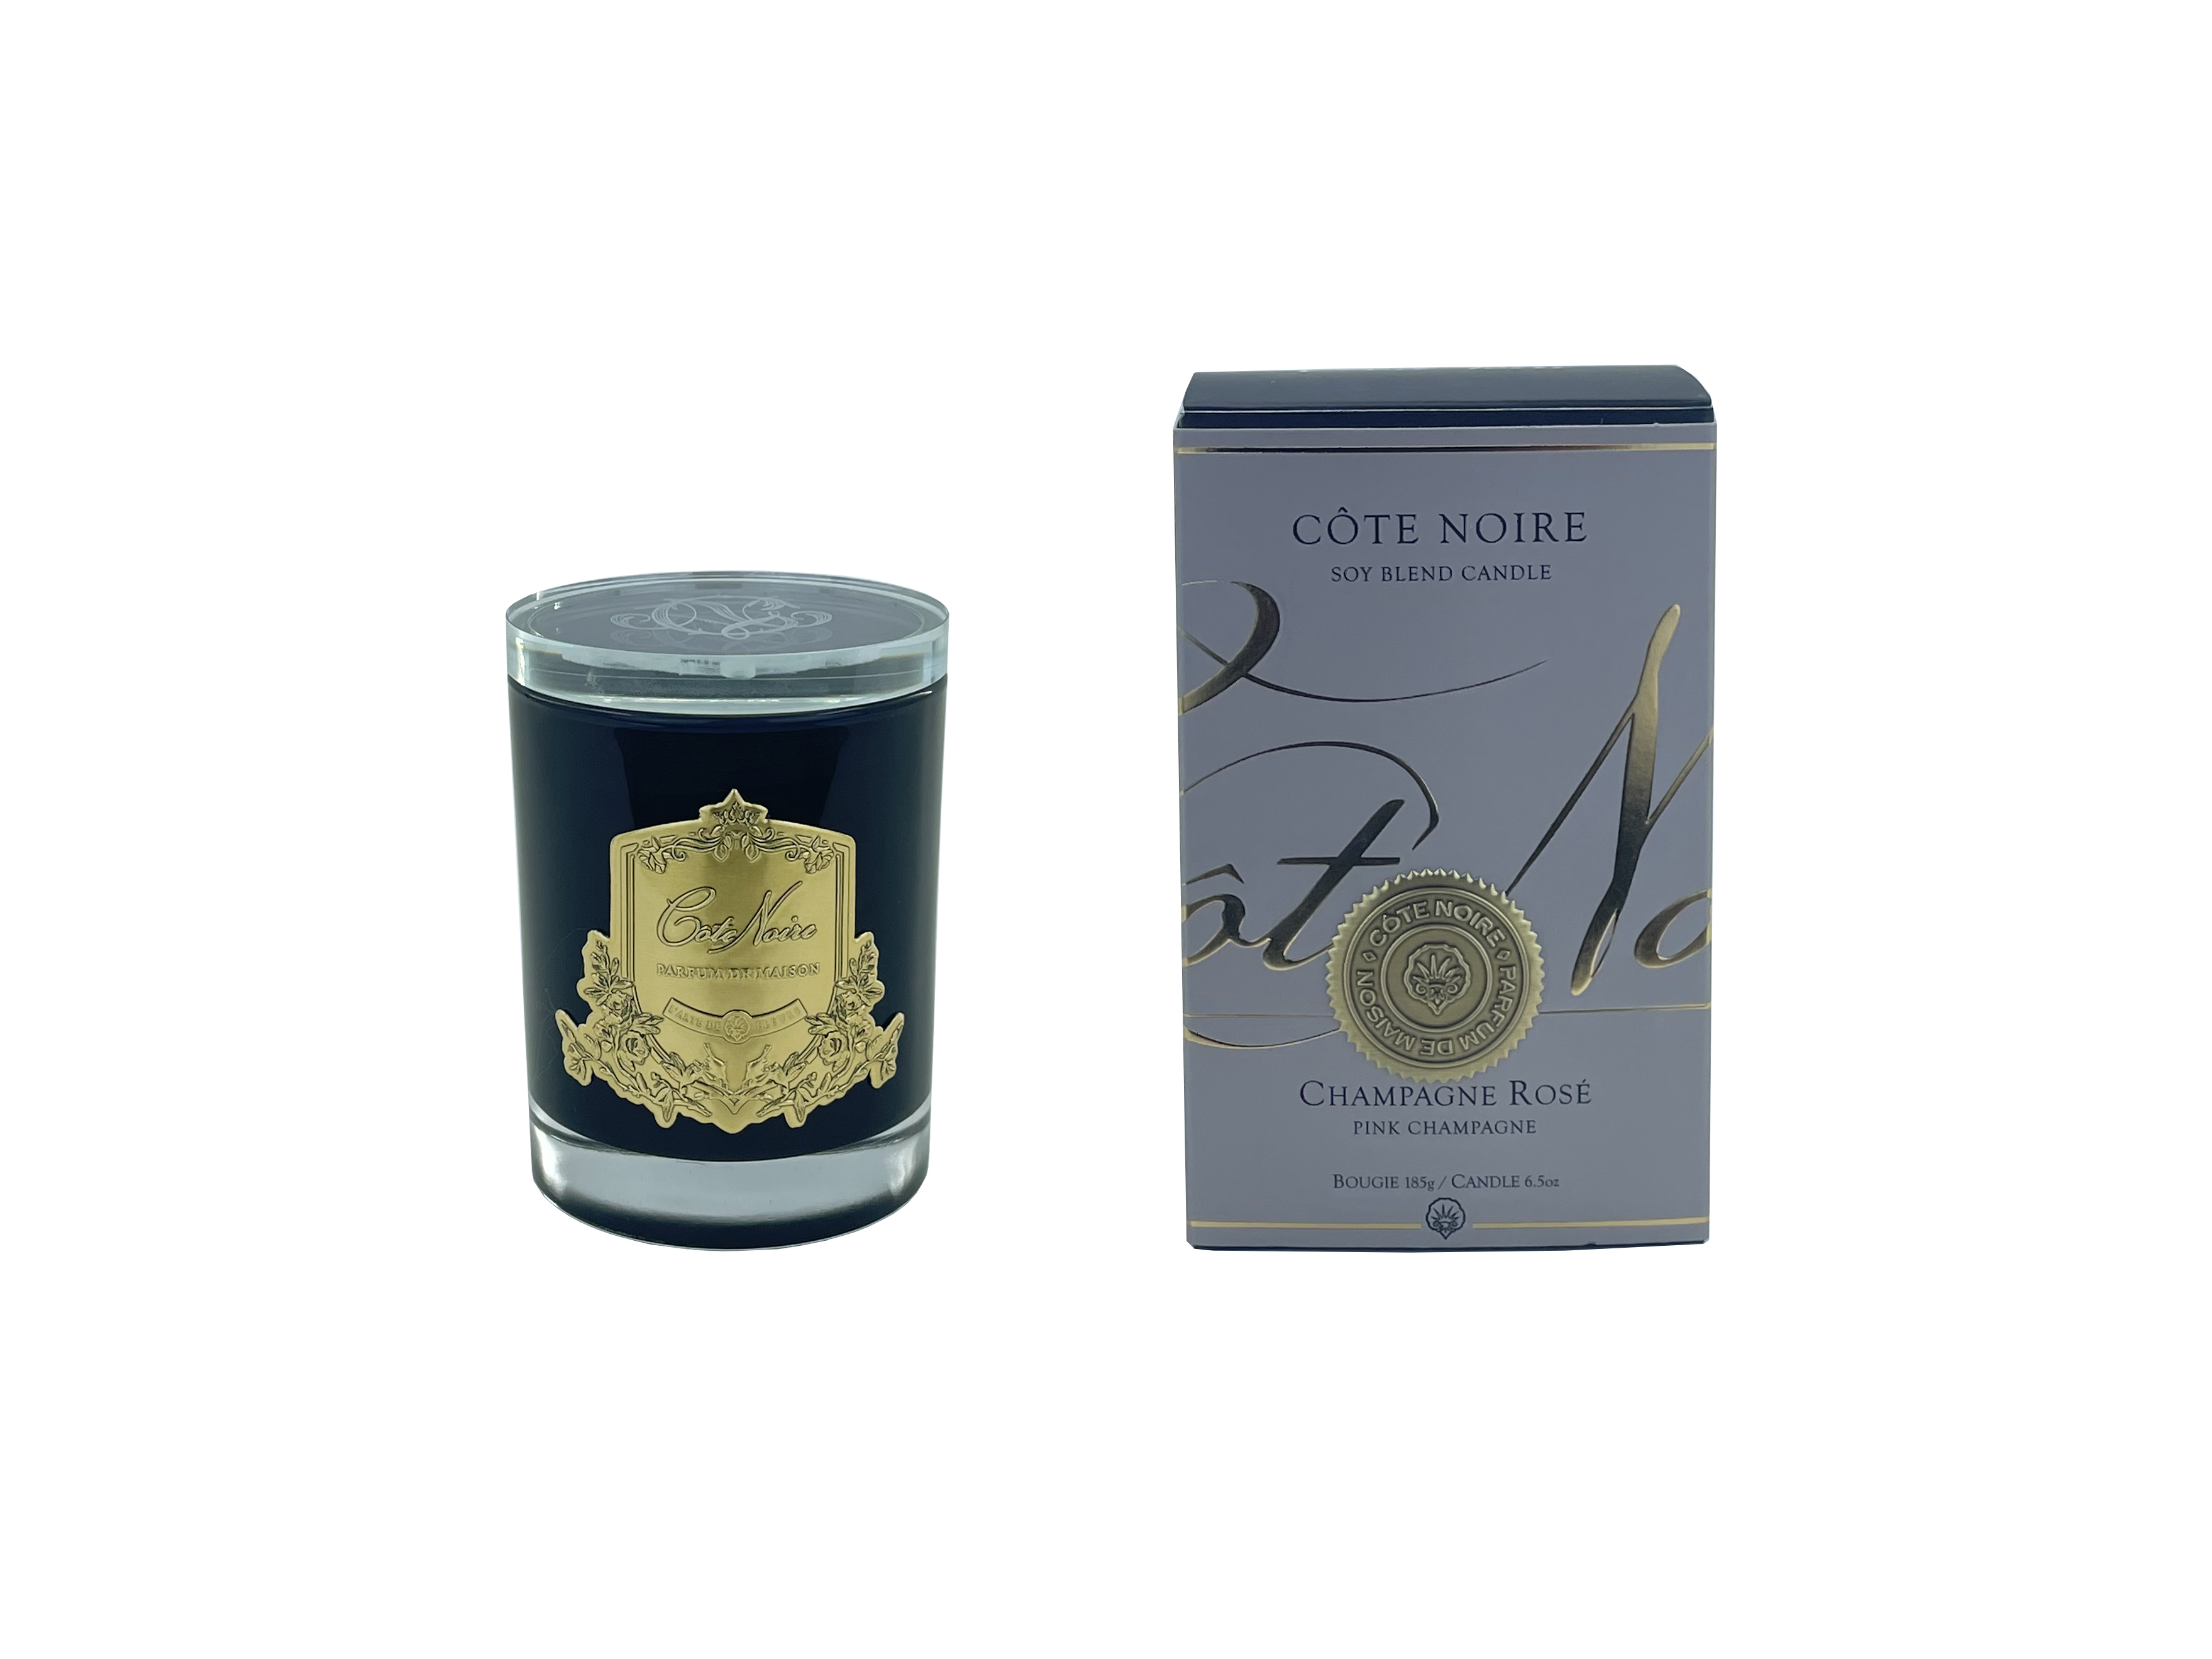 Cote Noire Pink Champagne 185g Soy Blend Candle - Gold